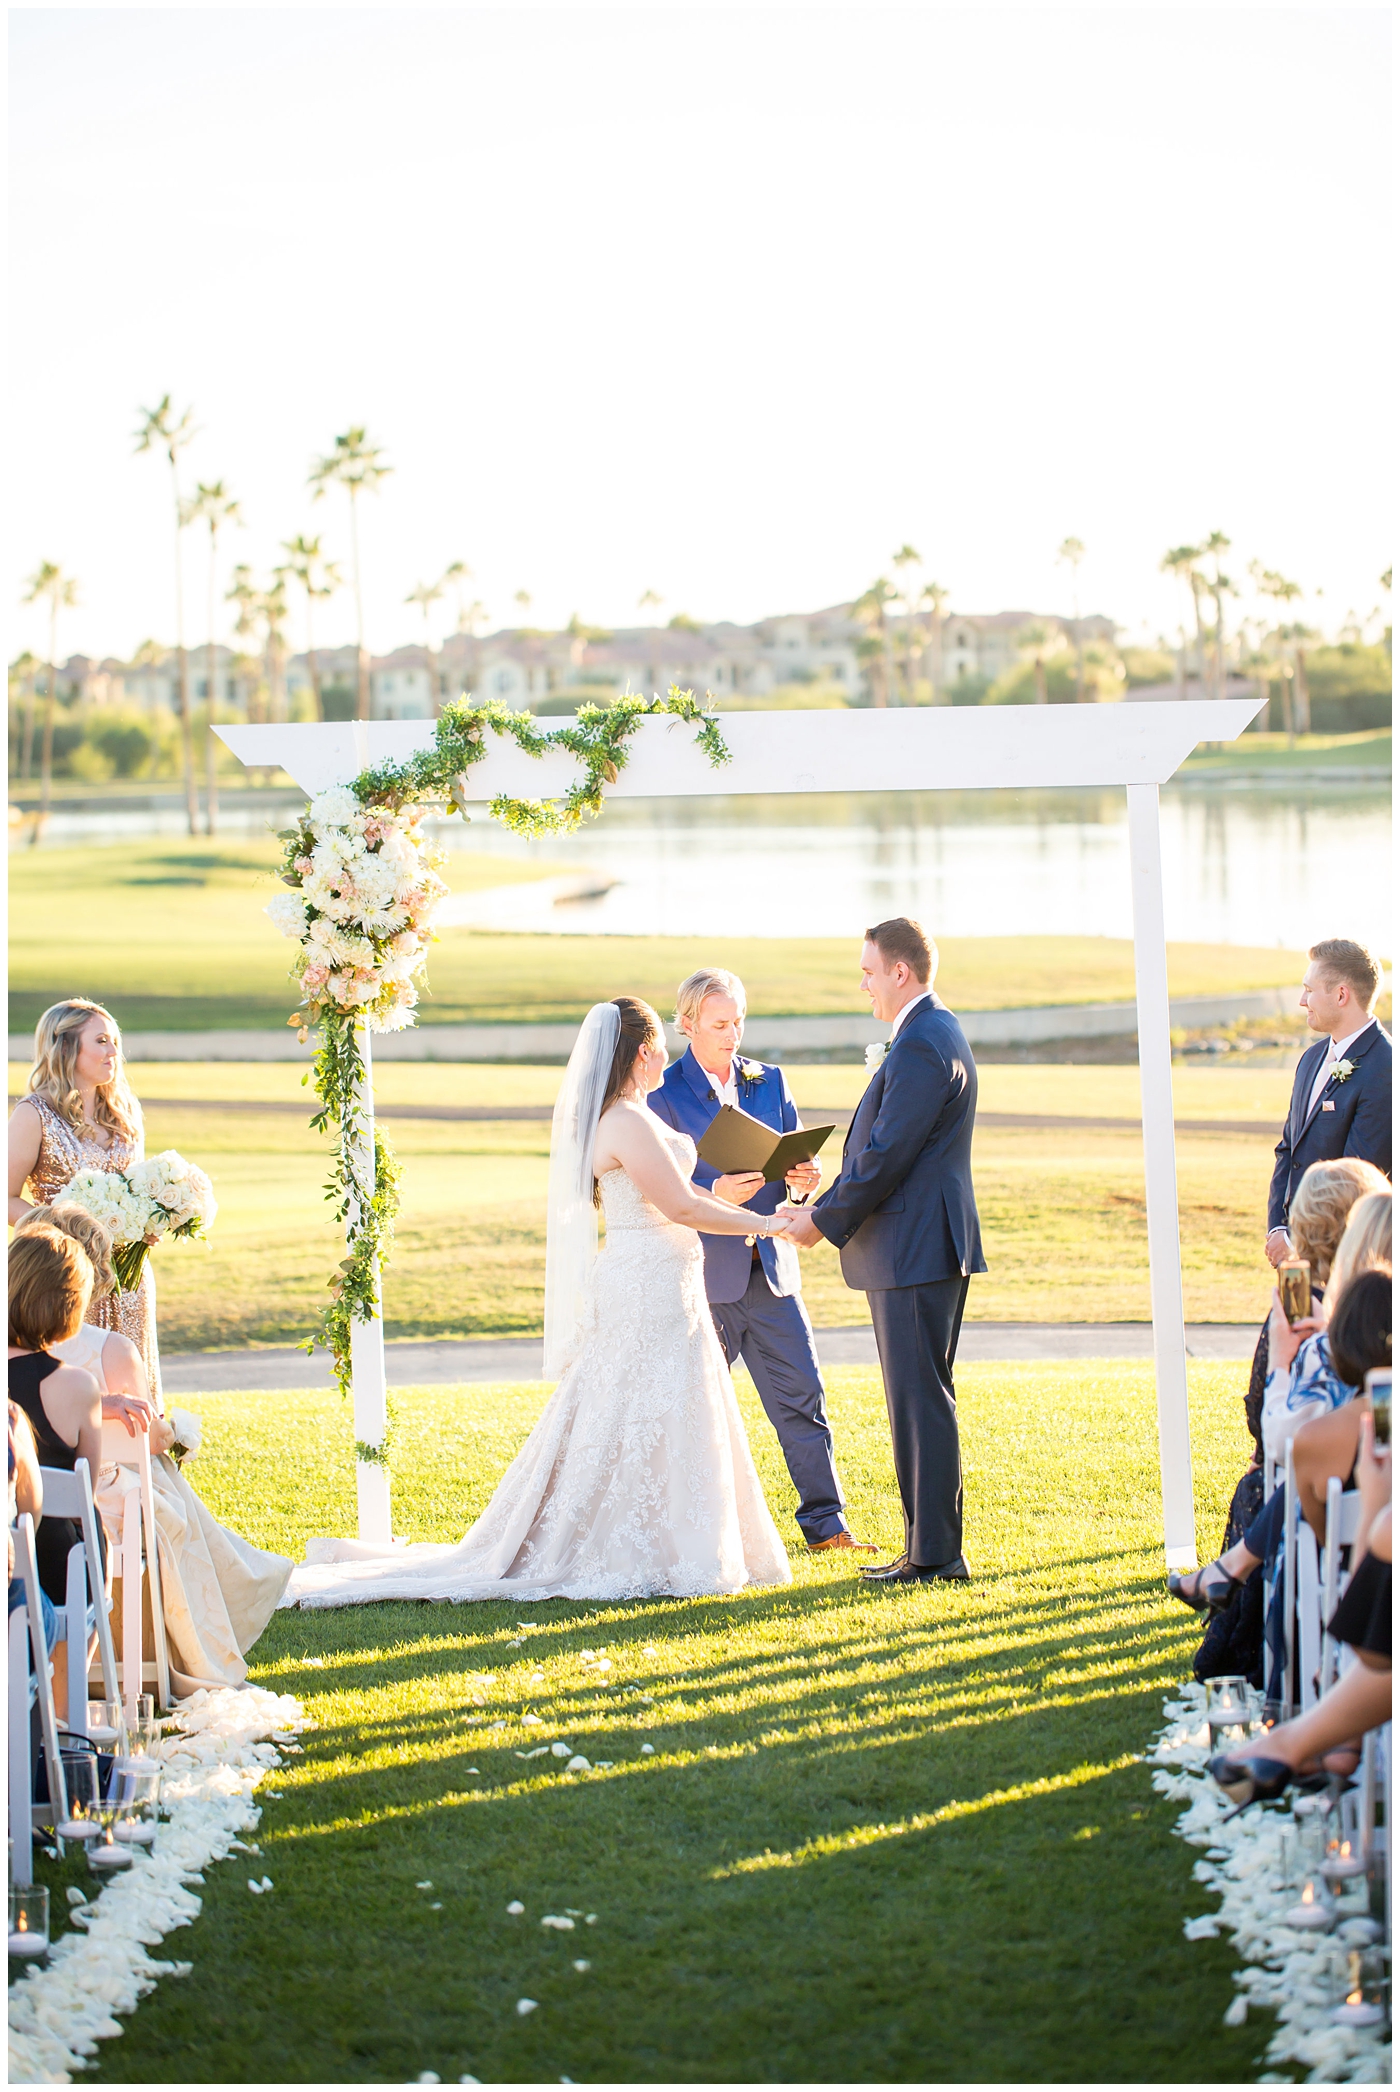 bride in lillian lottie couture wedding dress with white rose bouquet and groom in navy blue suit from men's warehouse bride and groom during wedding ceremony on golf course